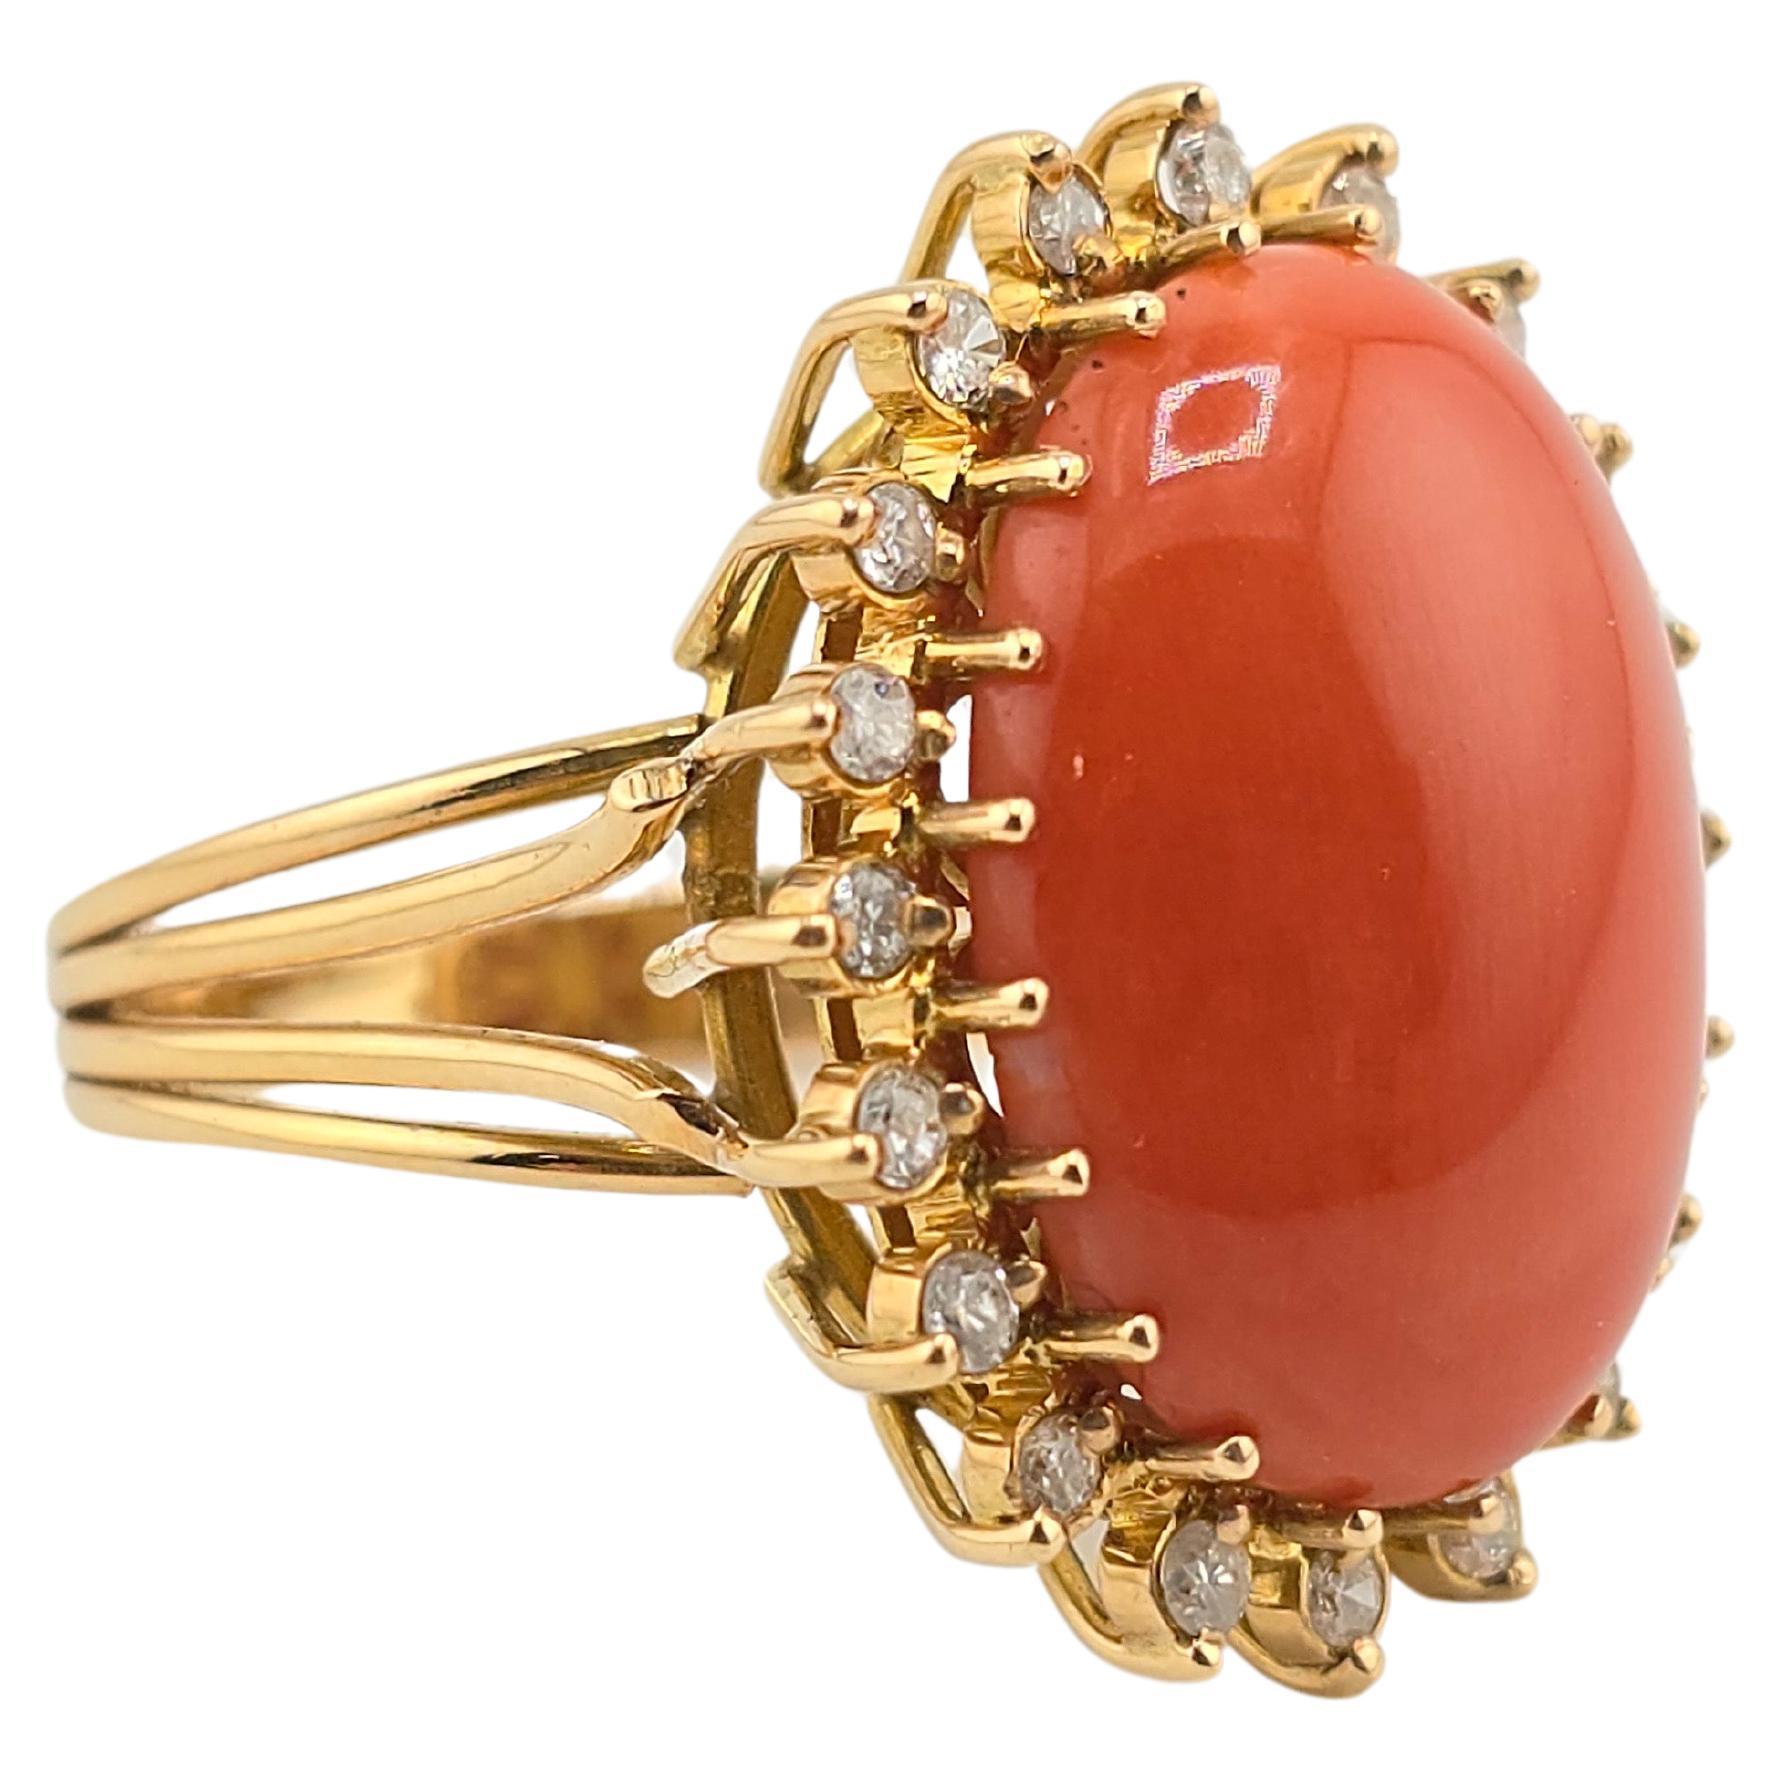 Marvelous Italian Momo Coral 14K Yellow Gold Ring Surrounded With Diamonds 